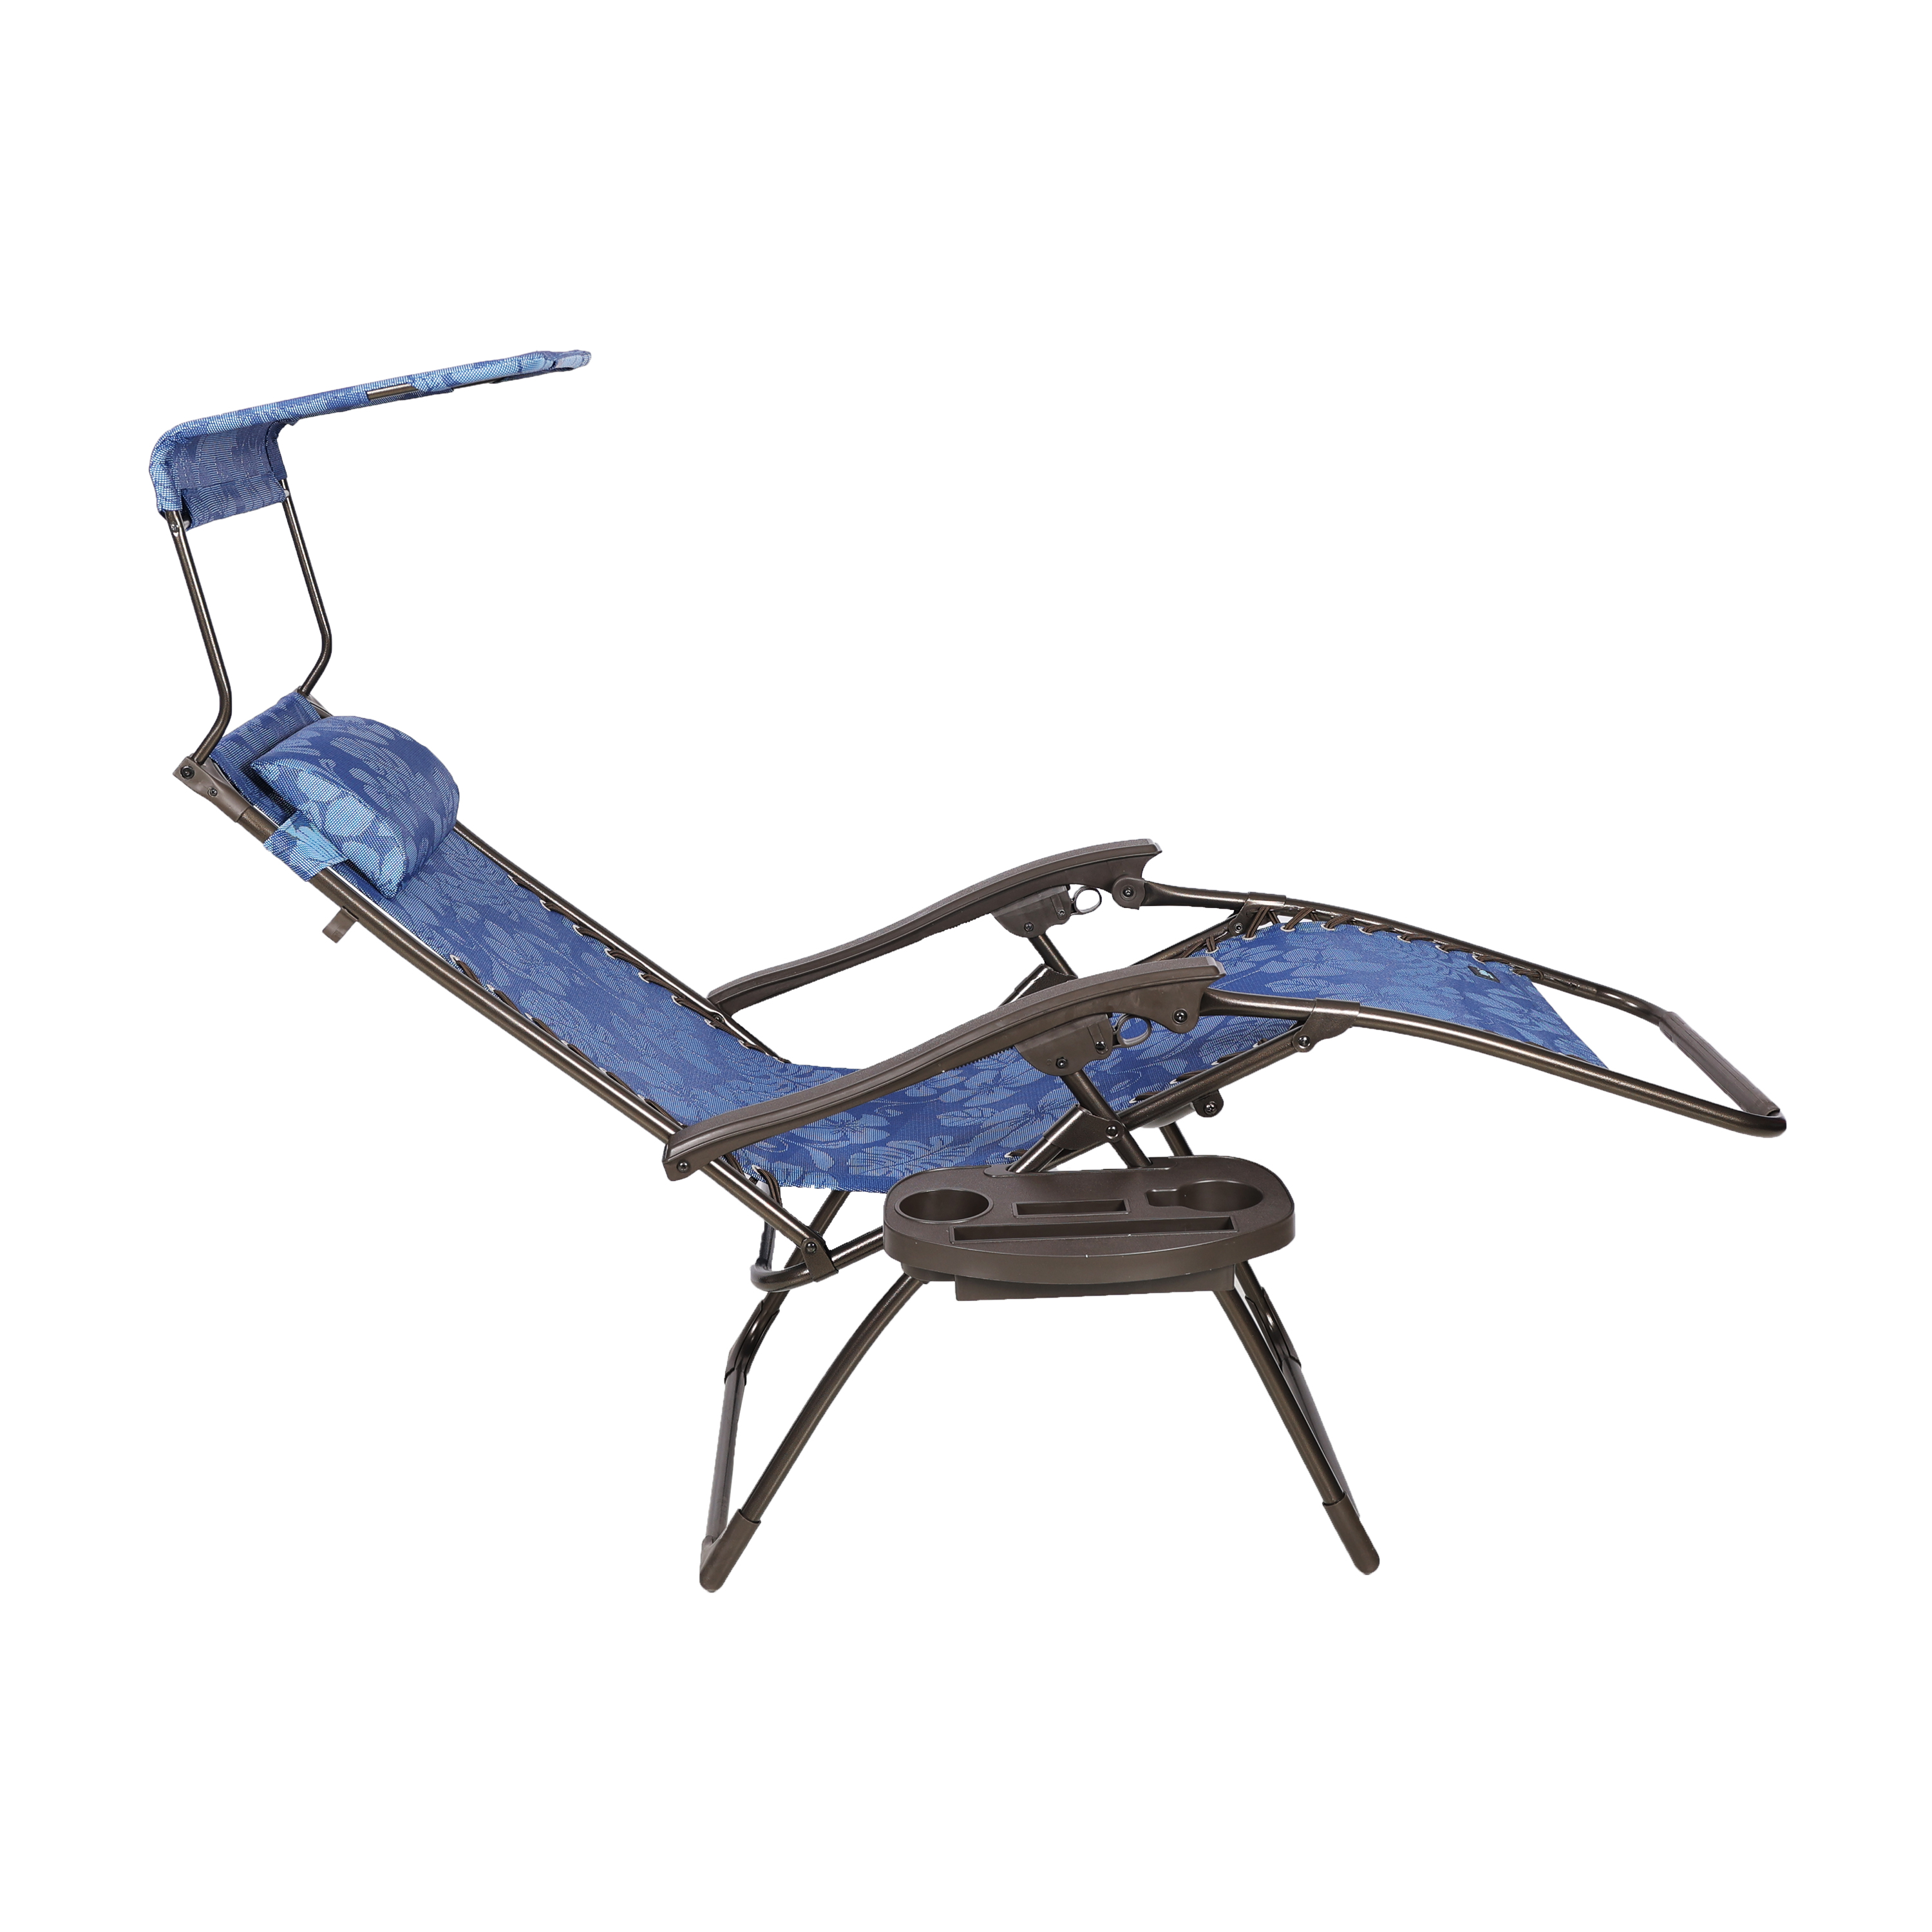 Bliss Hammocks 26-in Wide Zero Gravity Chair w/ Adjustable Canopy Sun-Shade, Drink Tray, & Adjustable Pillow, 300 Lbs Capacity (Blue Flowers) - image 2 of 3